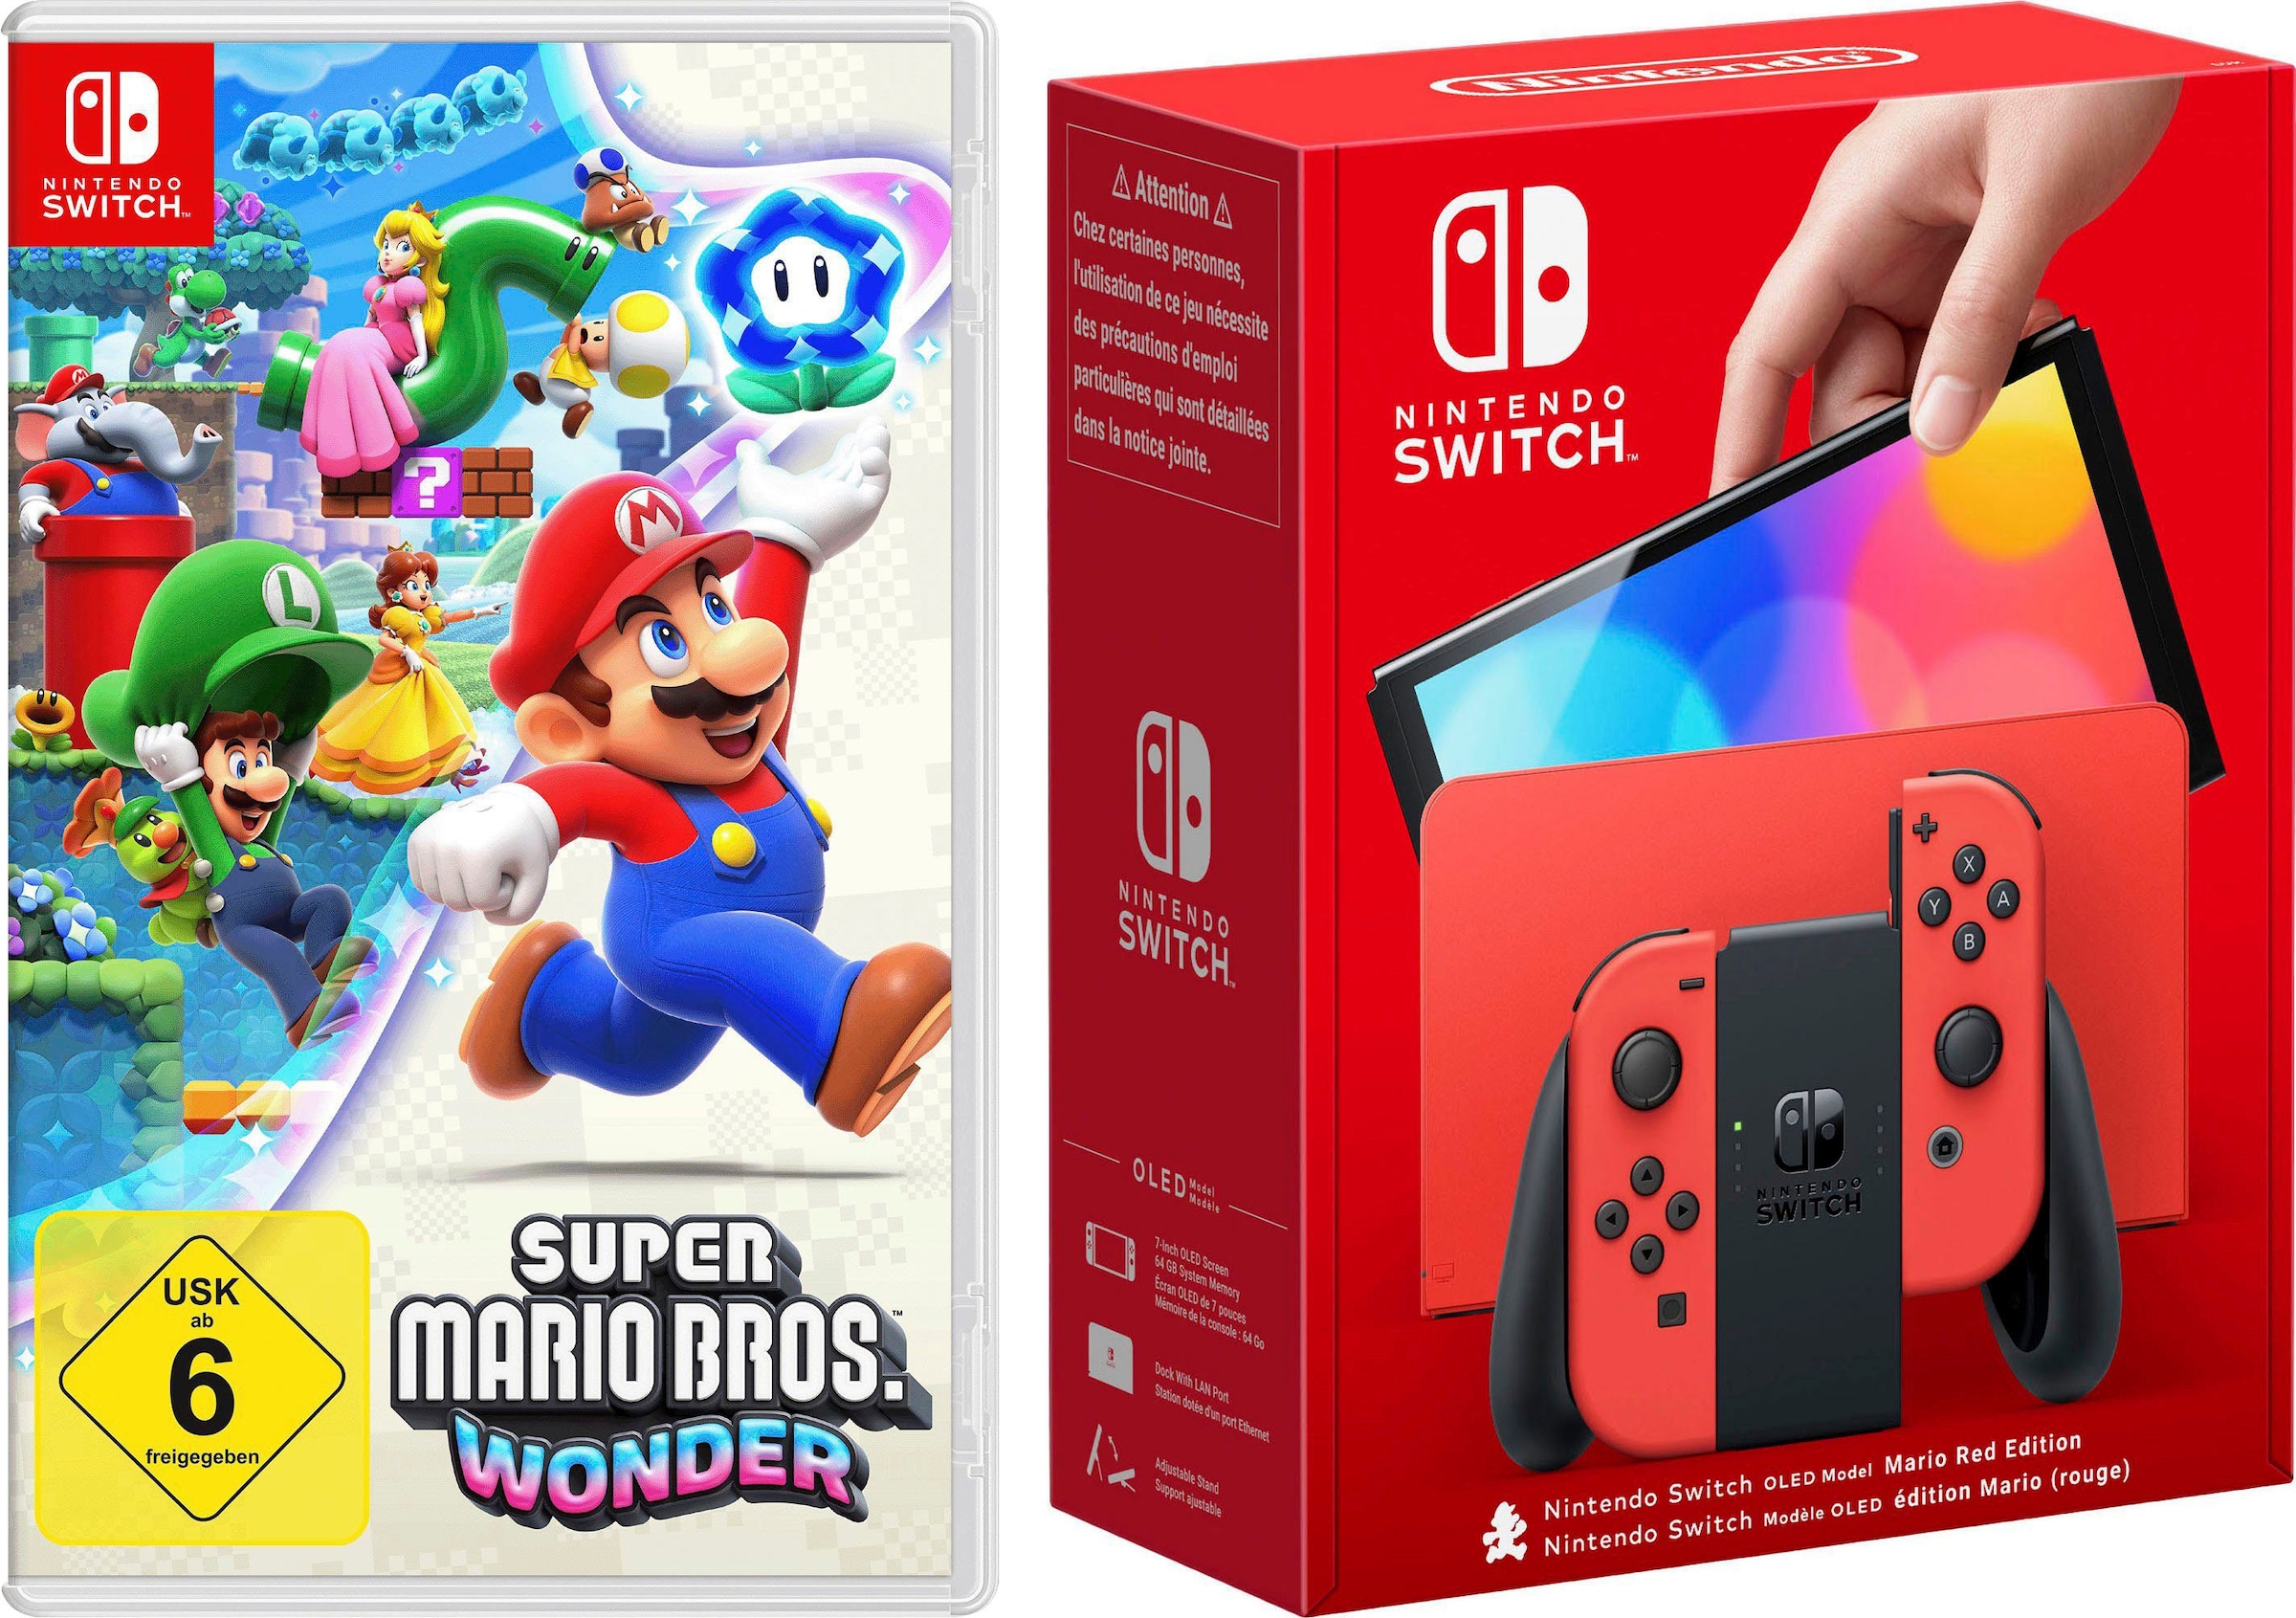 Nintendo Switch Konsole OLED-Modell Super Mario Edition rot